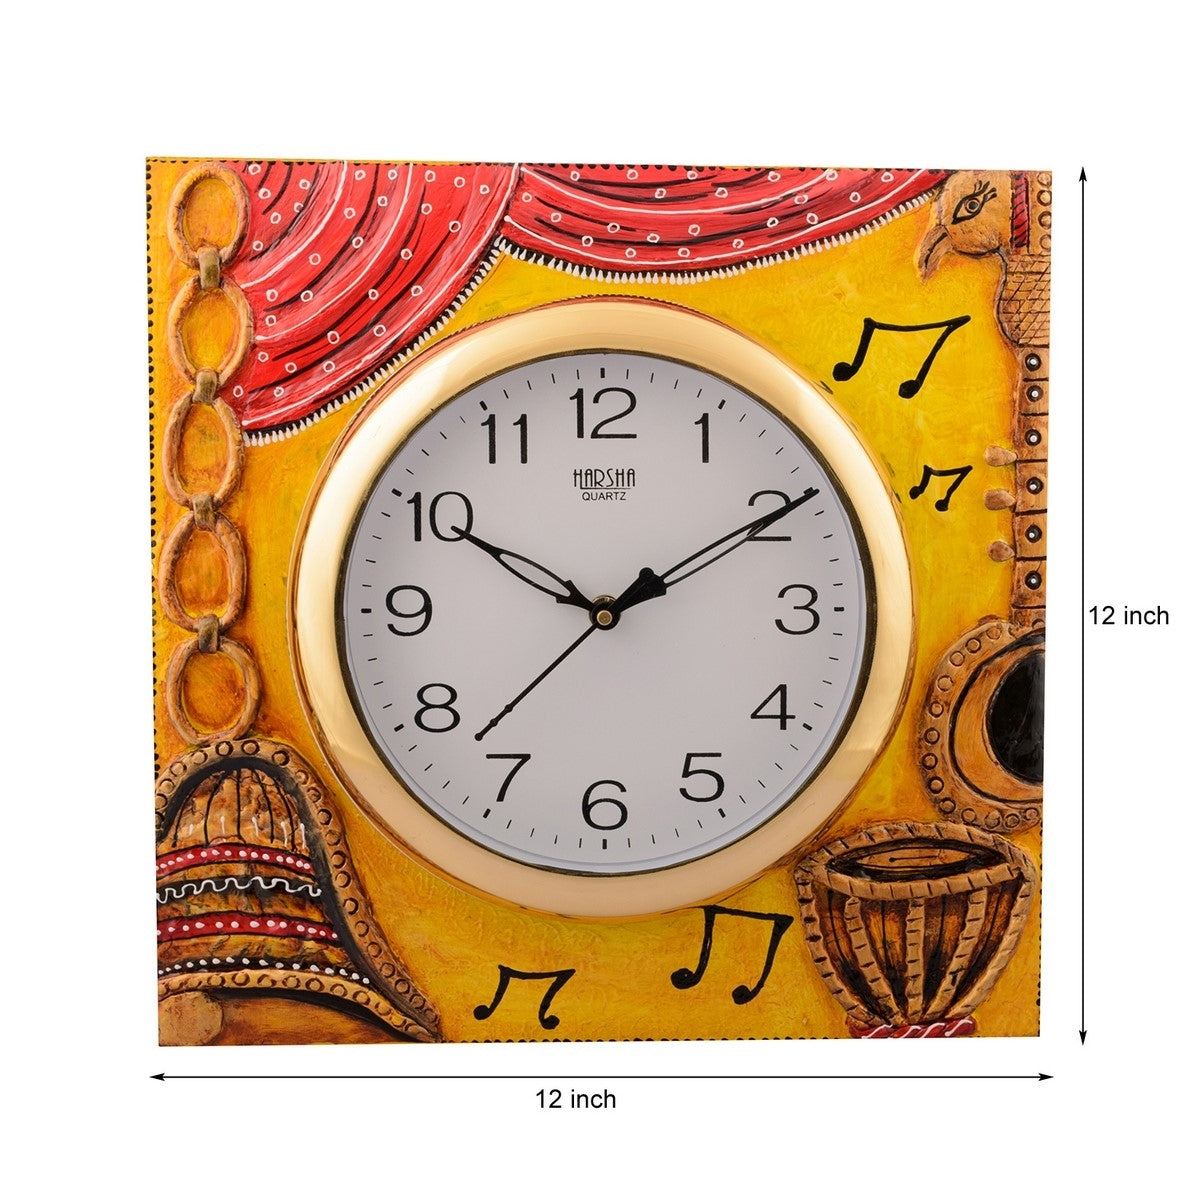 Artistic Handicrafted Square Shape Musical Instrument Designer Wooden Wall Clock 2